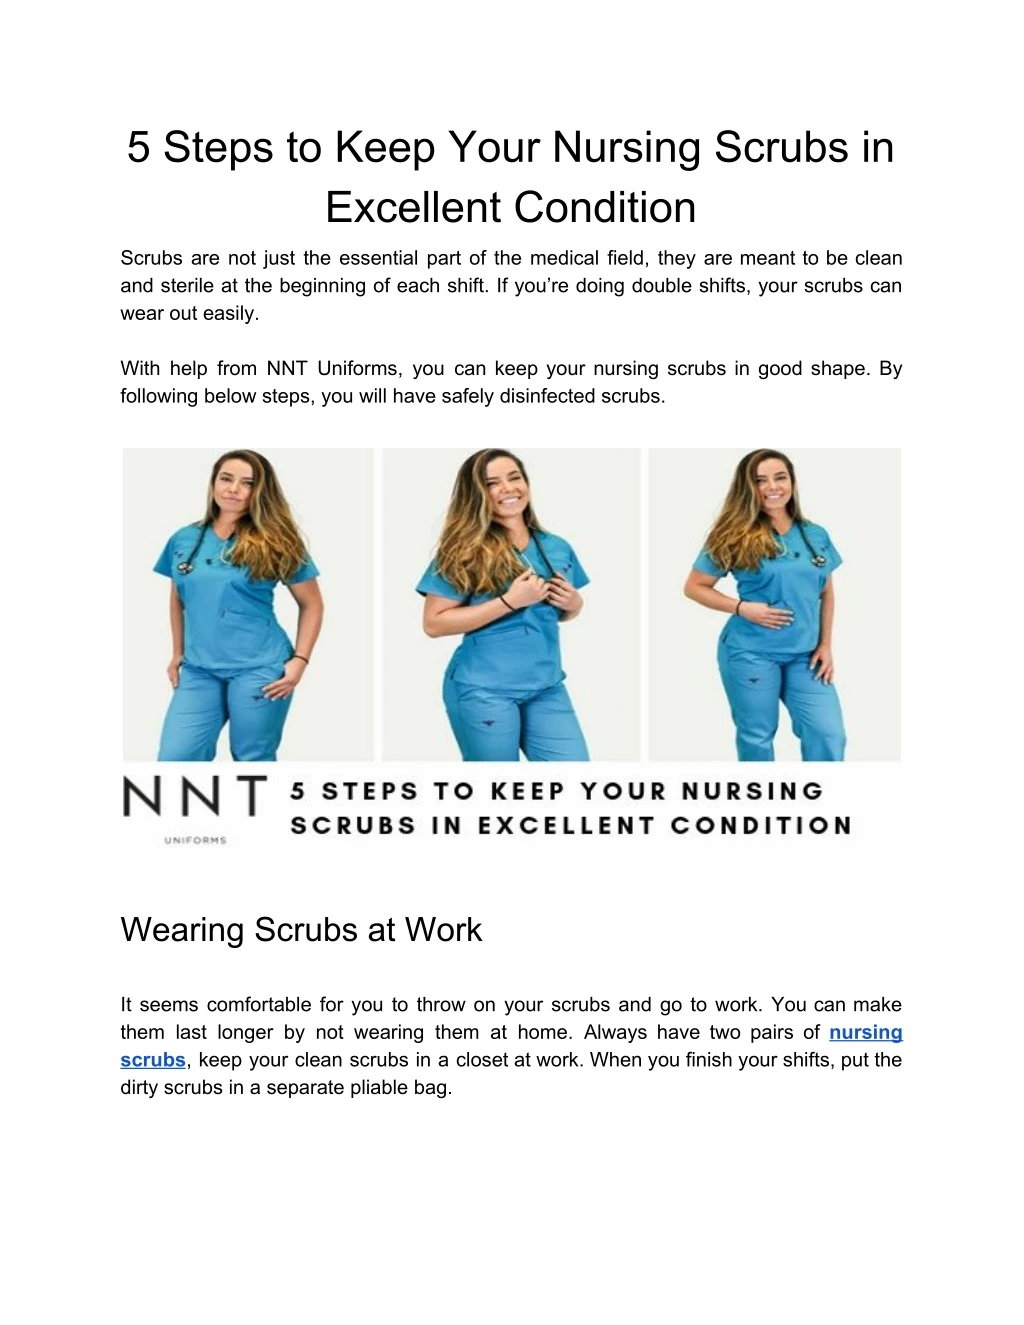 5 steps to keep your nursing scrubs in excellent